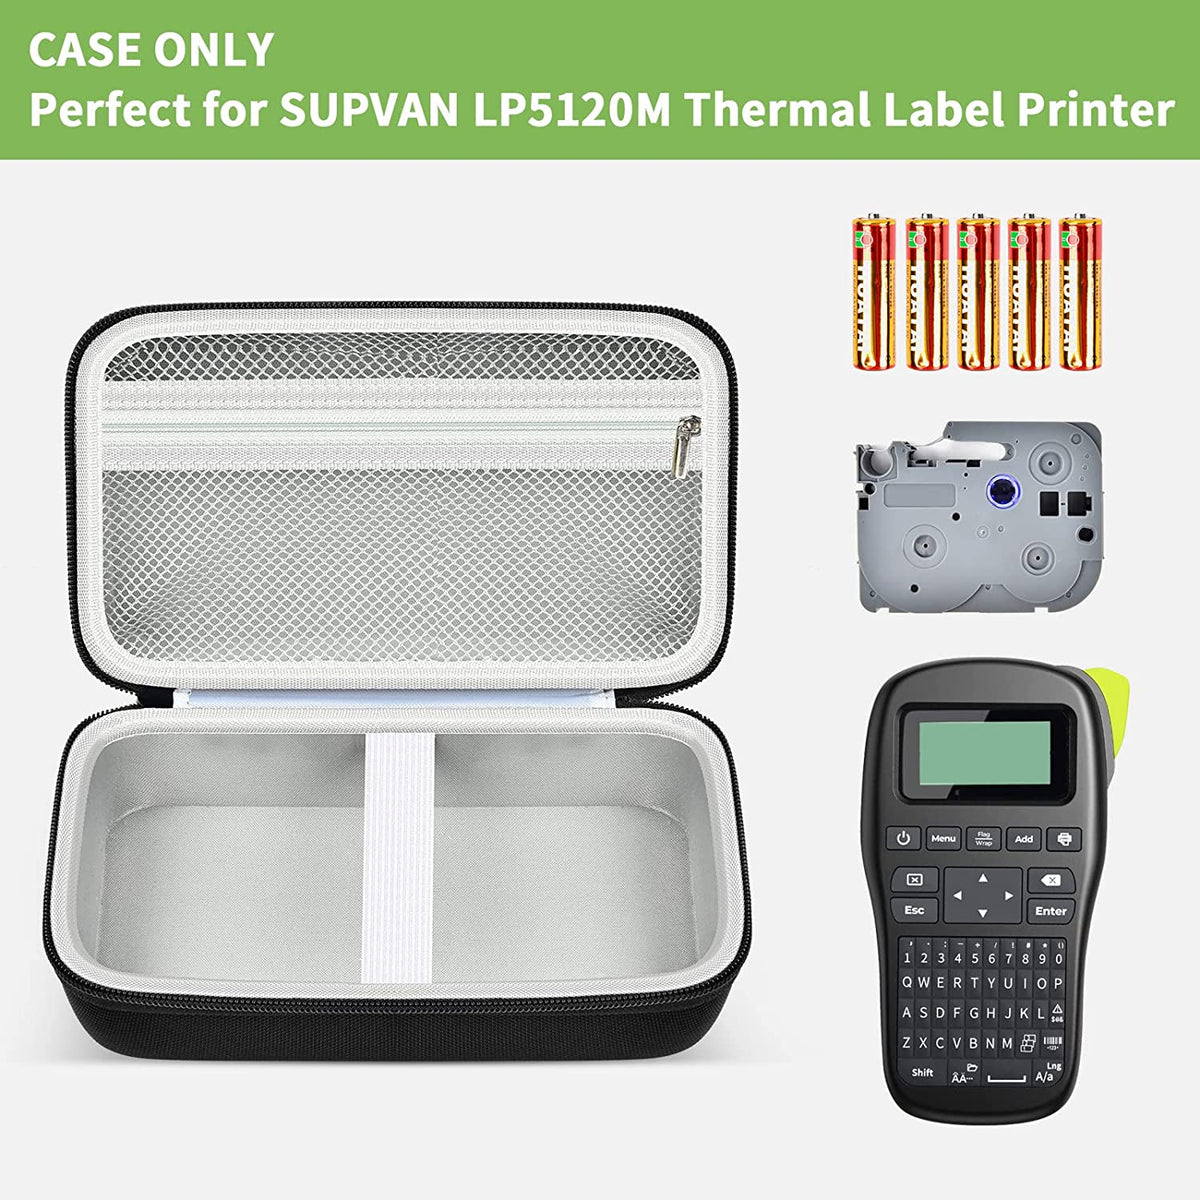 Case Compatible with SUPVAN LP5120M Thermal Label Printer, Holder for Label Maker Machine & Laminated Label Tape, Box with Mesh Pocket for Batteries Tapes Refills Accessories (Case Only